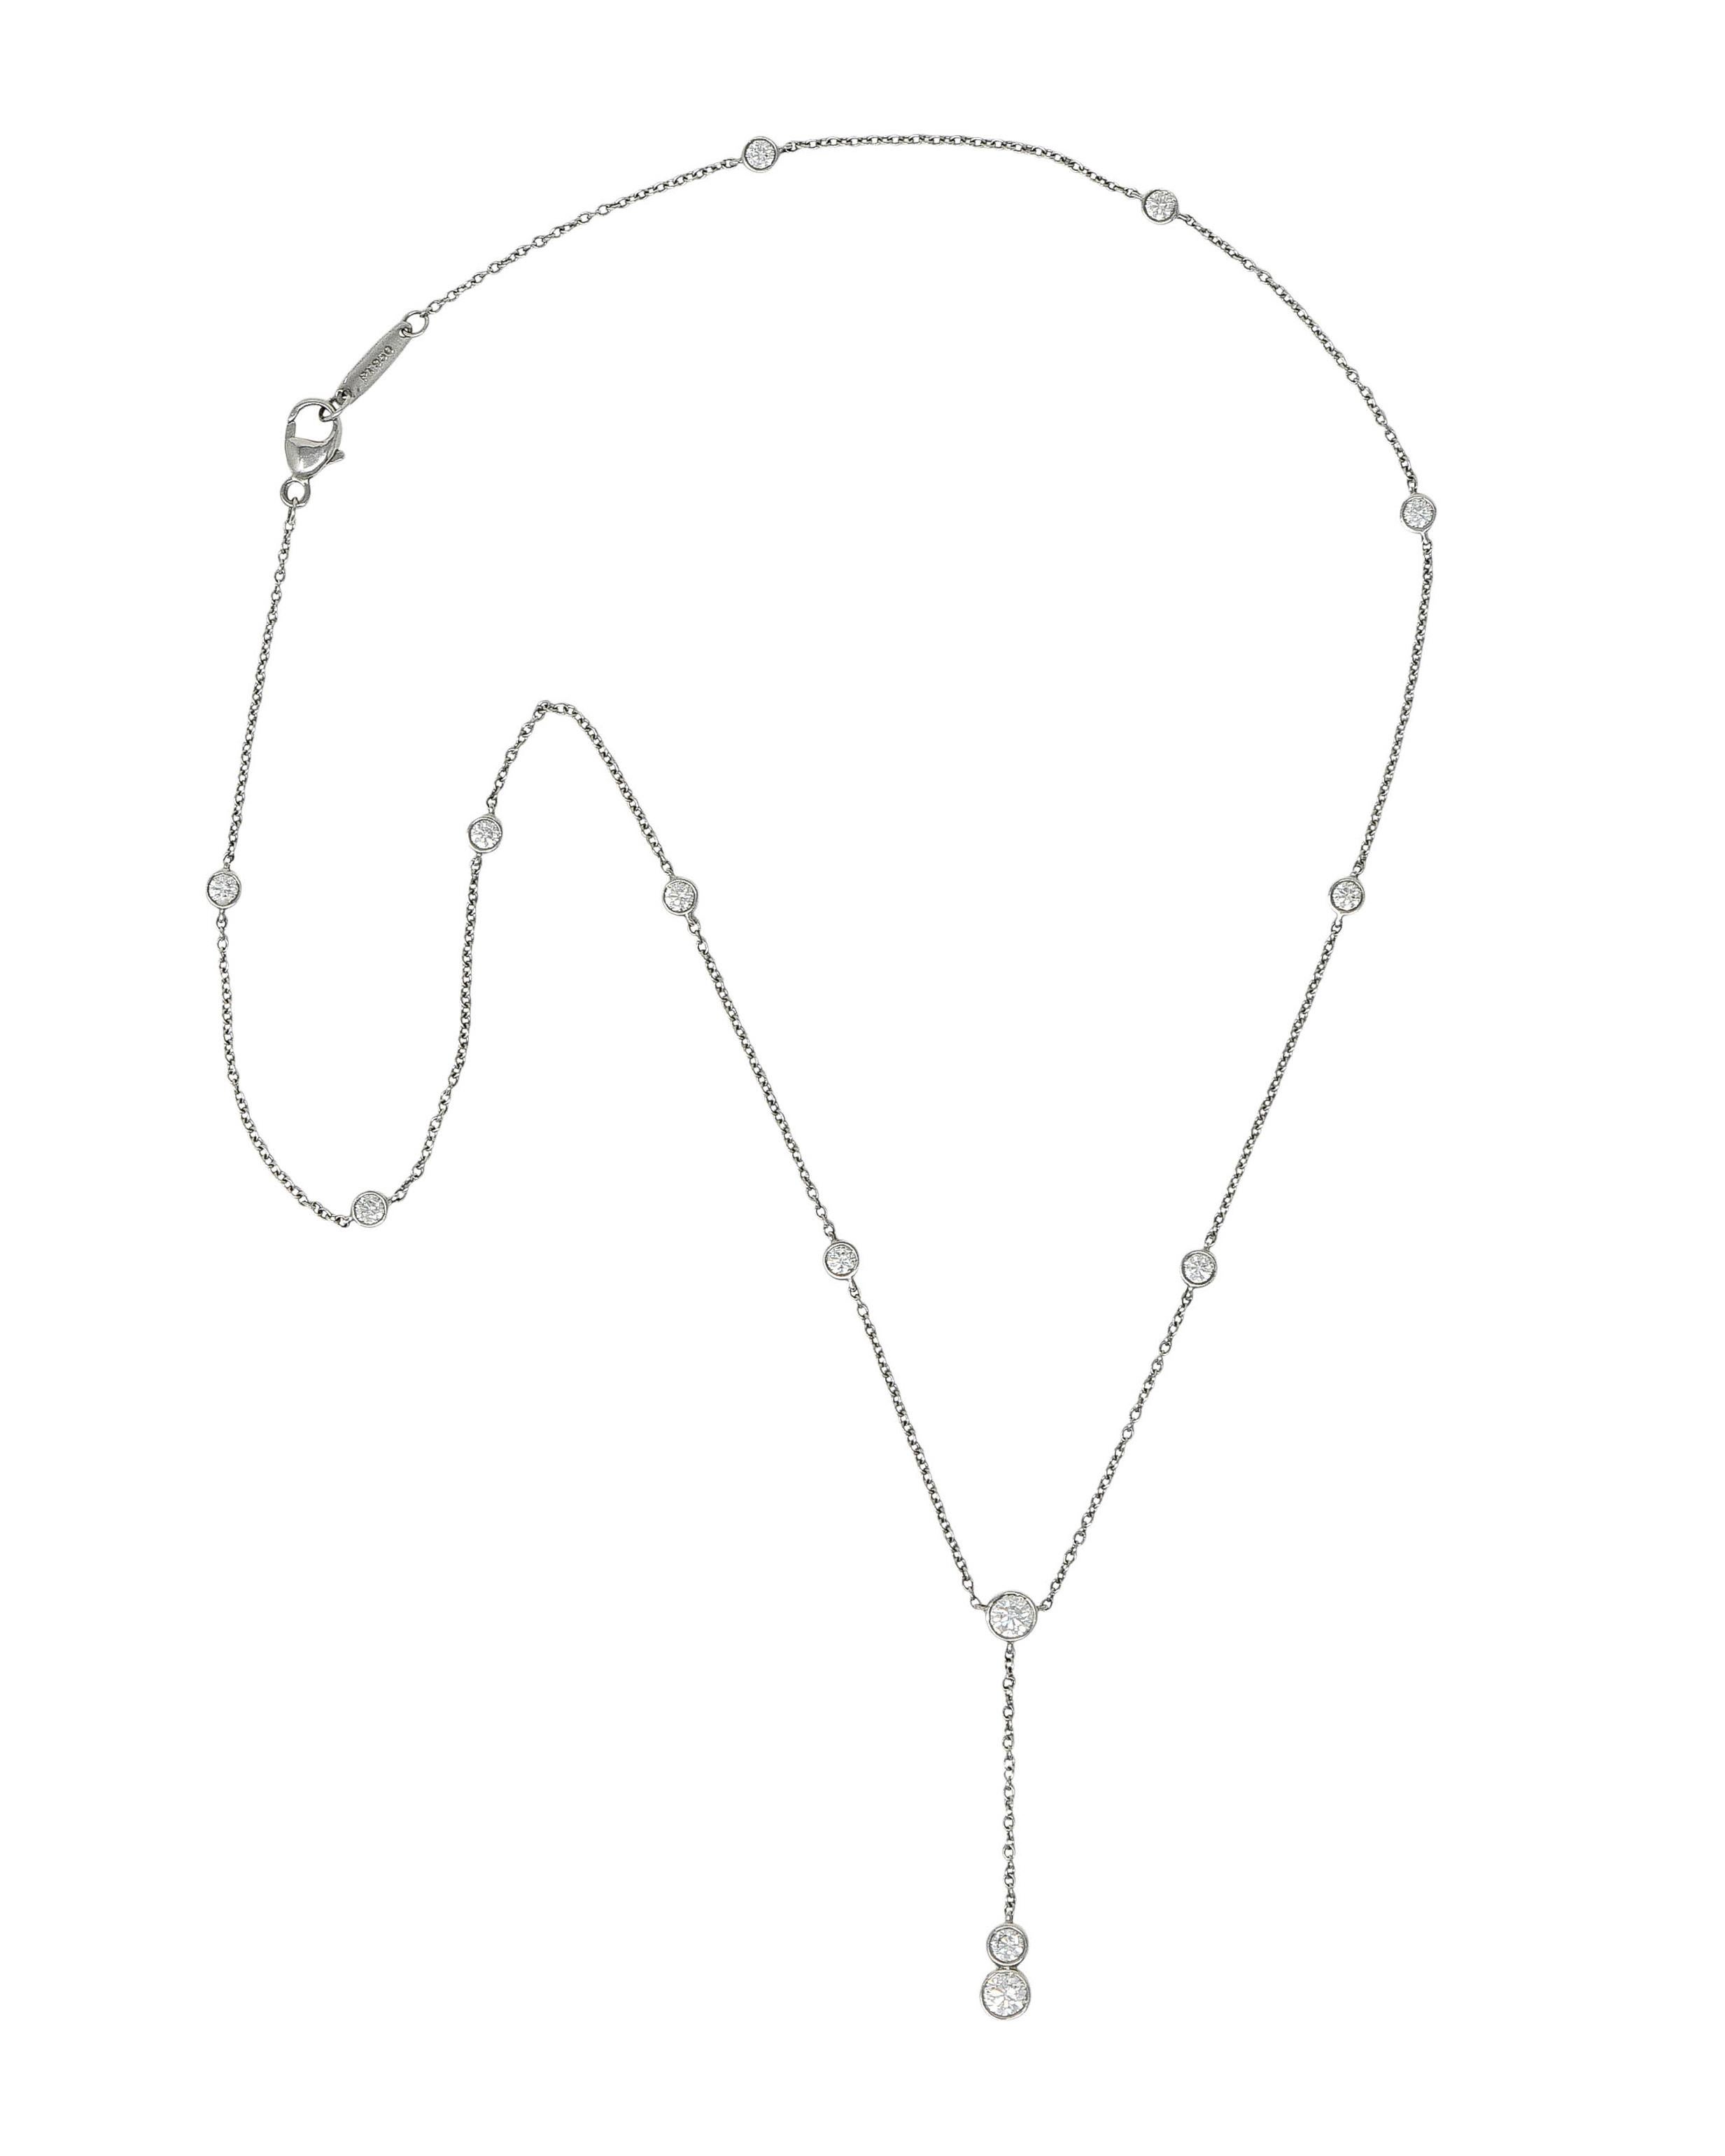 Classic cable chain necklace in a Diamonds-by-the-Yard style with a lariat drop

With bezel set stations throughout featuring round brilliant cut diamonds

Weighing in total approximately 1.00 carat with F/G color and VS clarity

Completed by a